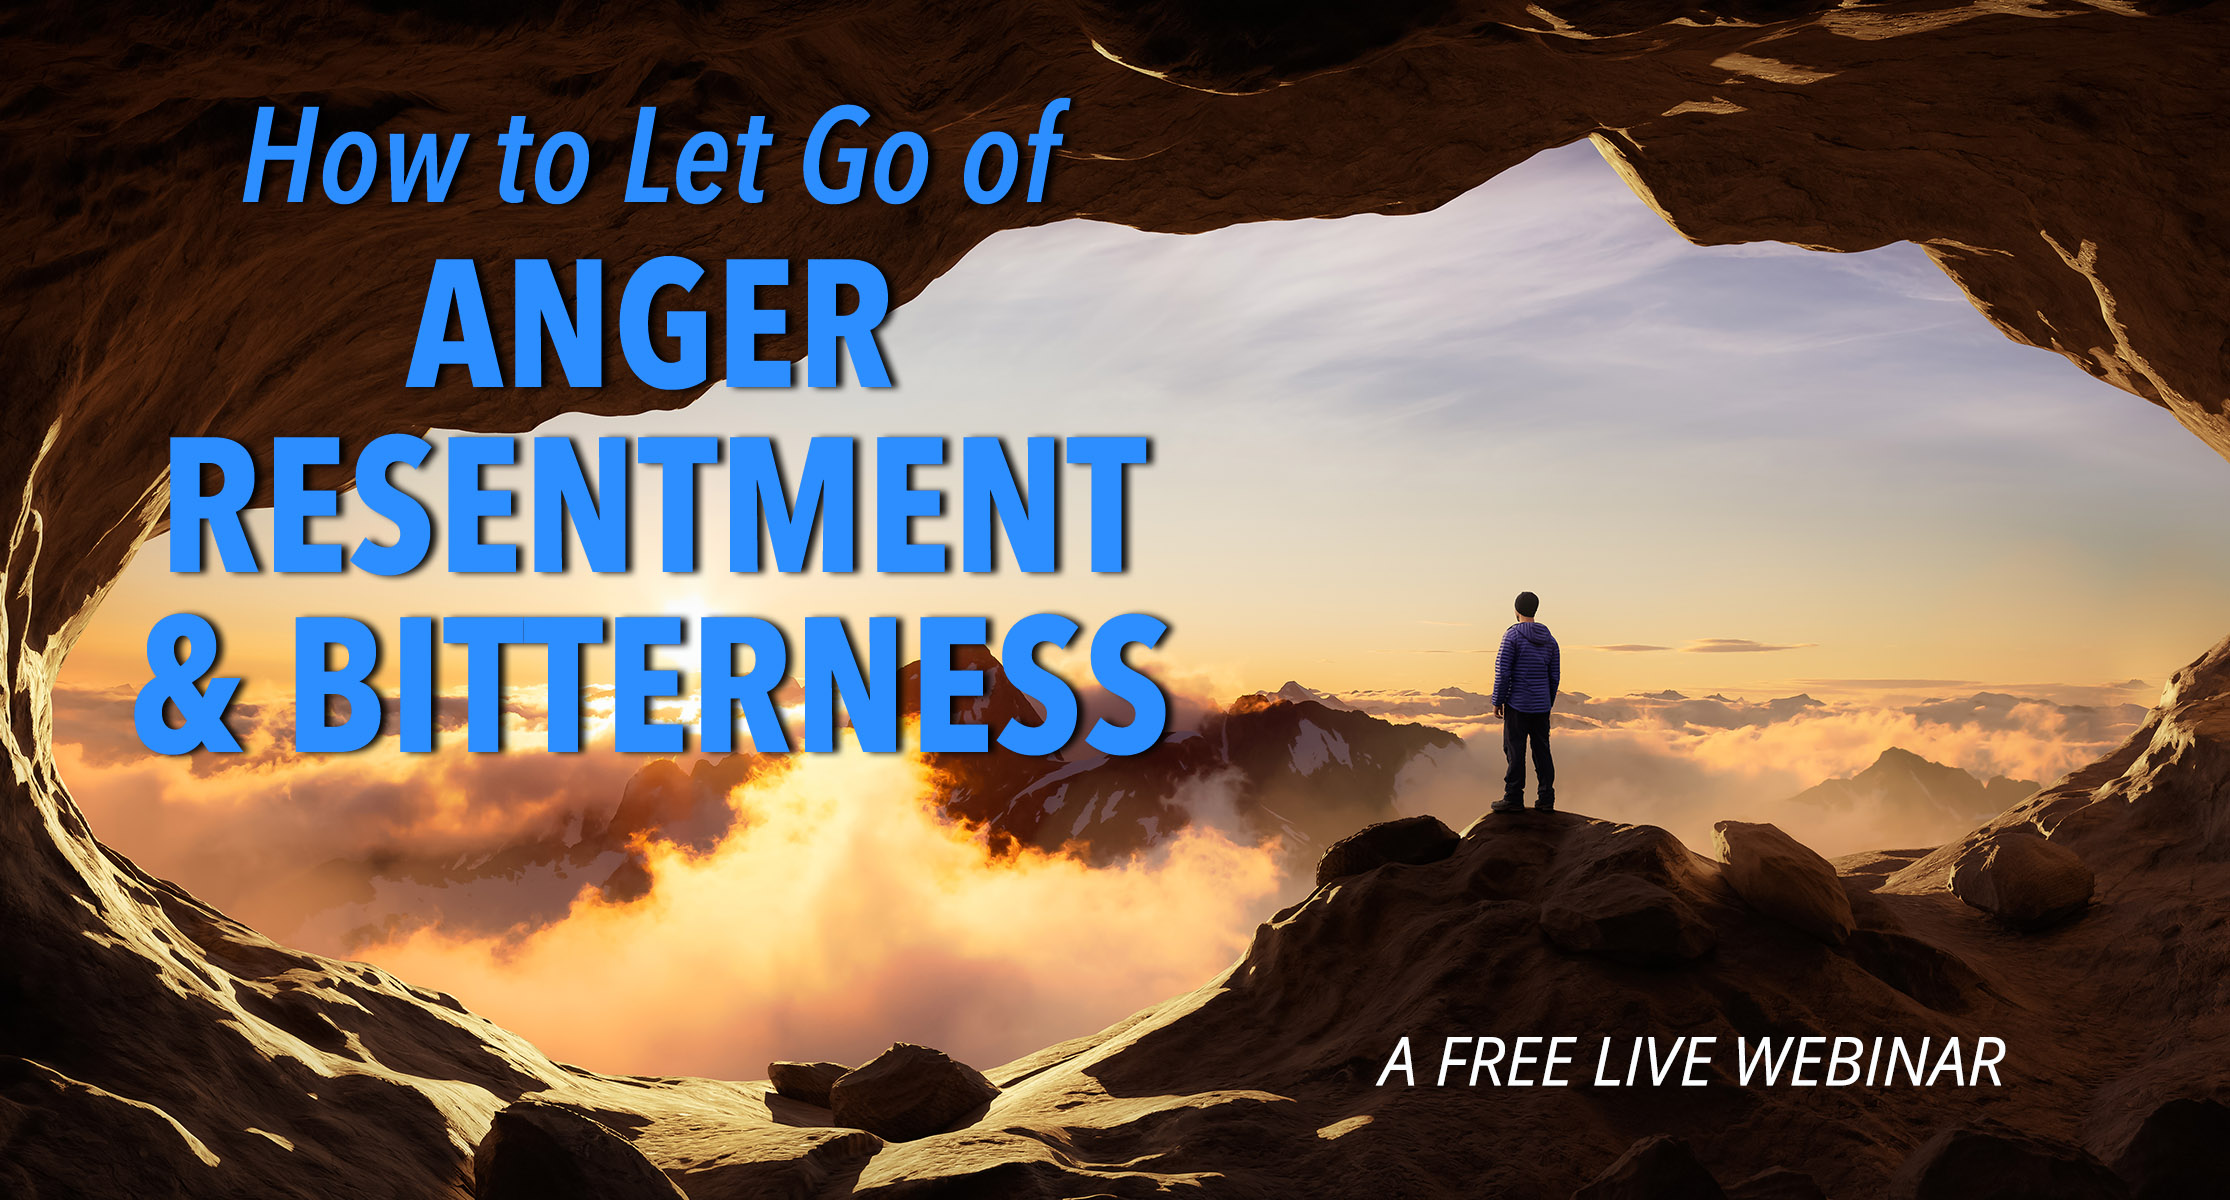 How to Let Go of Anger, Resentment & Bitterness